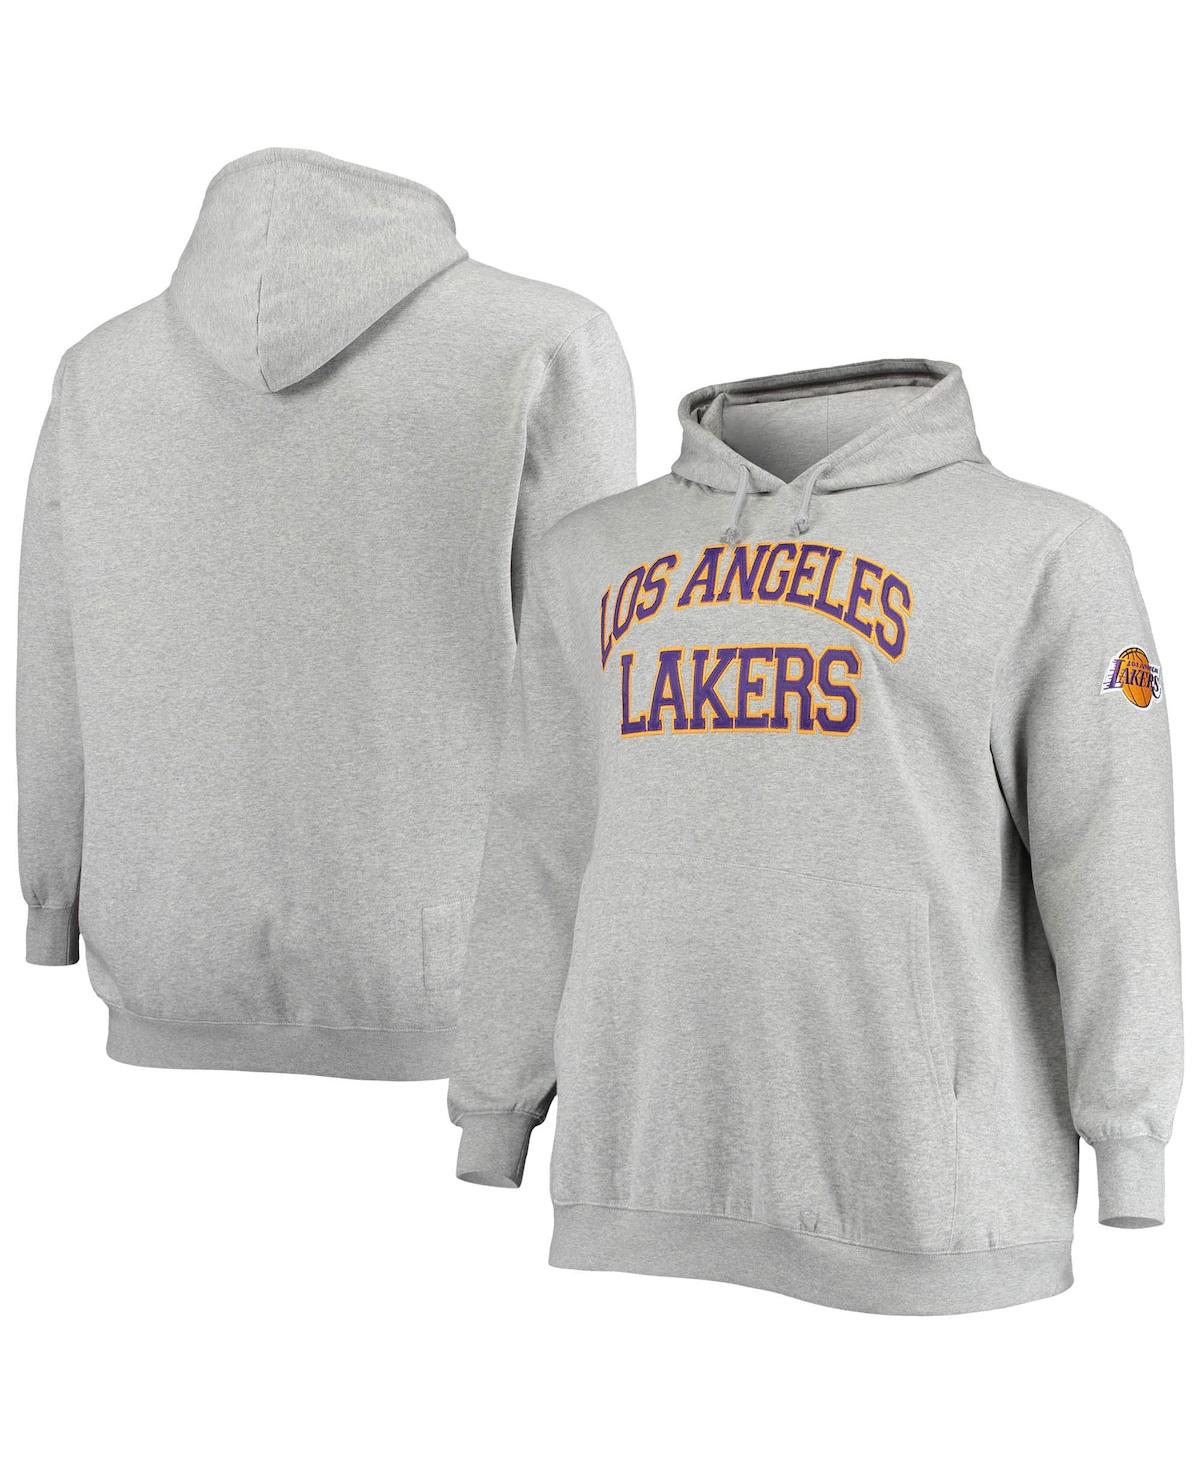 Men's Mitchell & Ness Heather Gray Los Angeles Lakers Hardwood Classics Big and Tall Throwback Pullover Hoodie - Heathered Gray